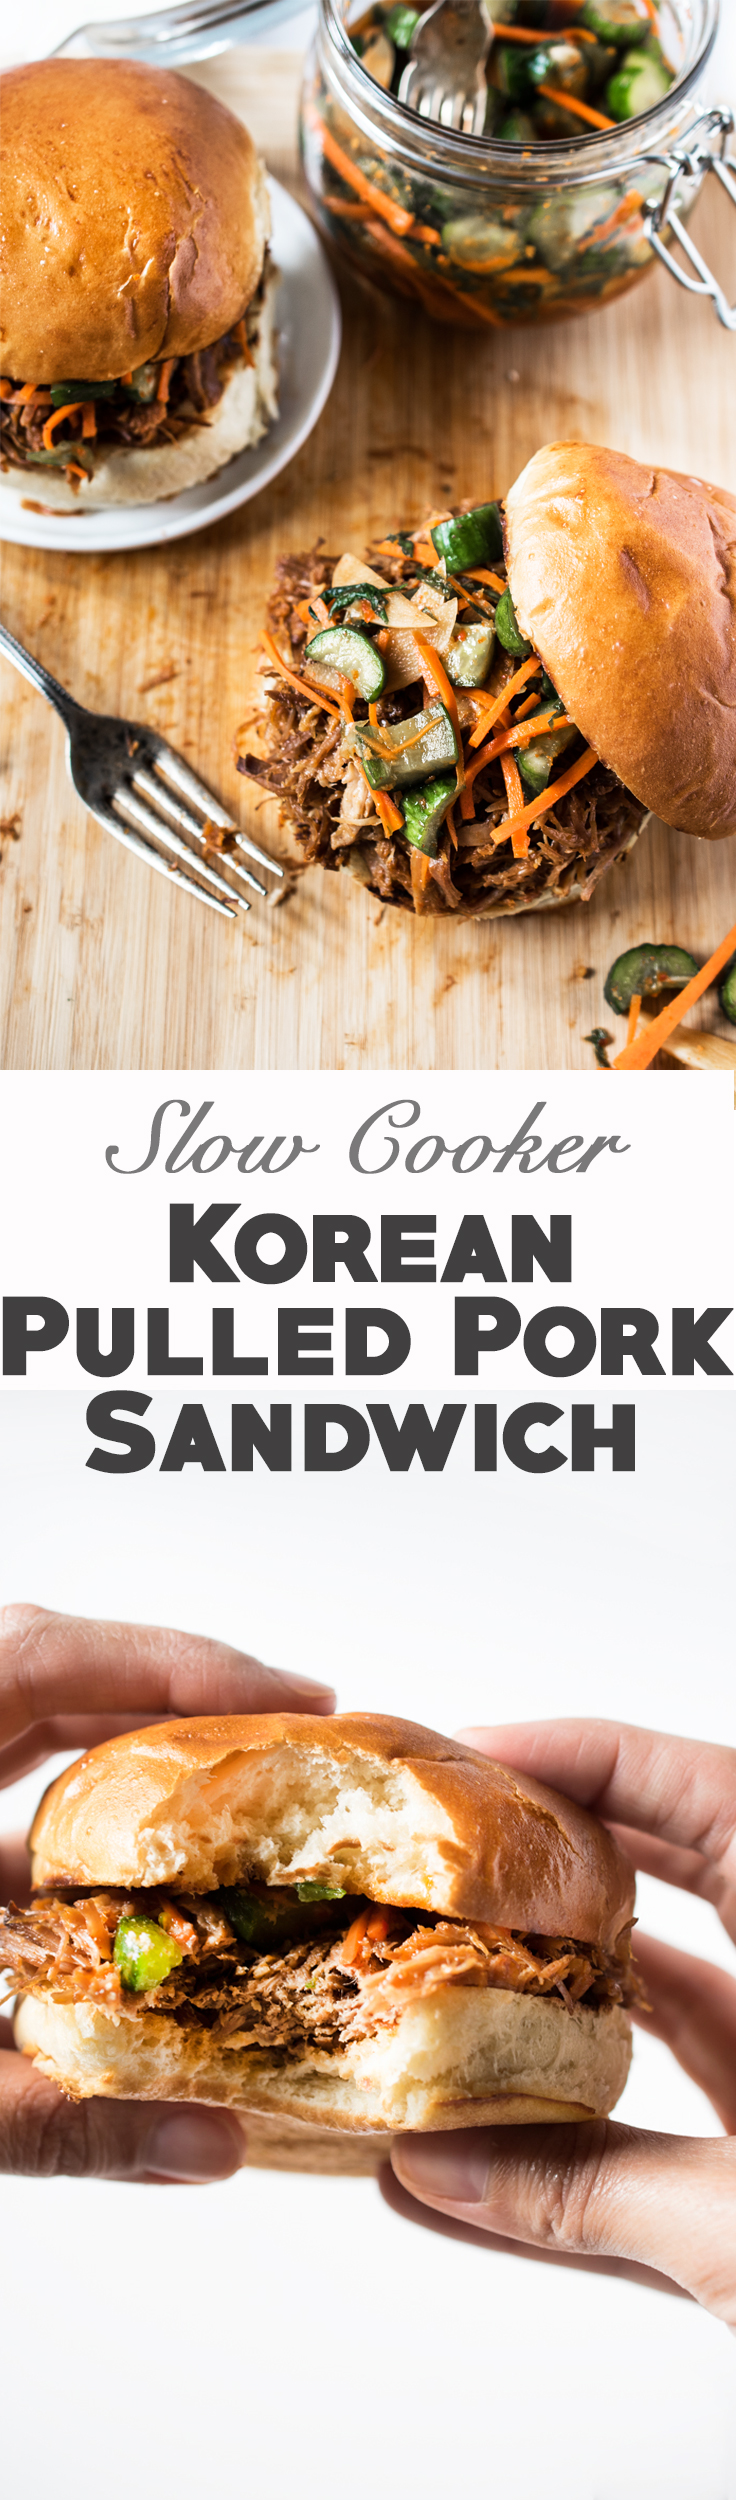 Slow Cooker Korean Pulled Pork with Cucumber Kimchi and Gochujang BBQ Sauce